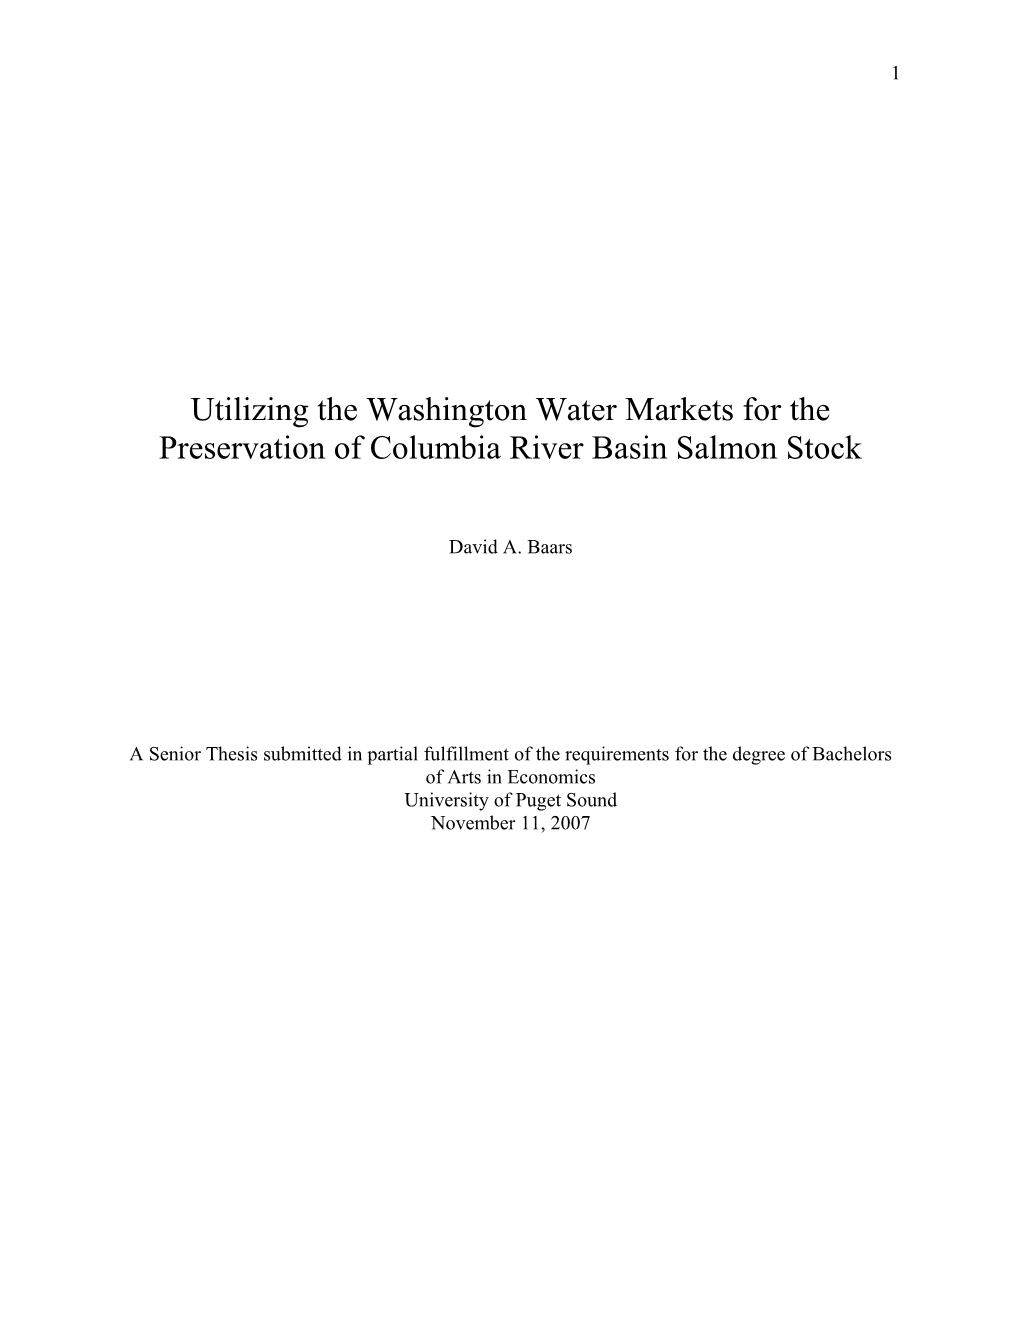 Utilizing The Washington Water Markets For The Preservation Of Columbia River Basin Salmon Stock